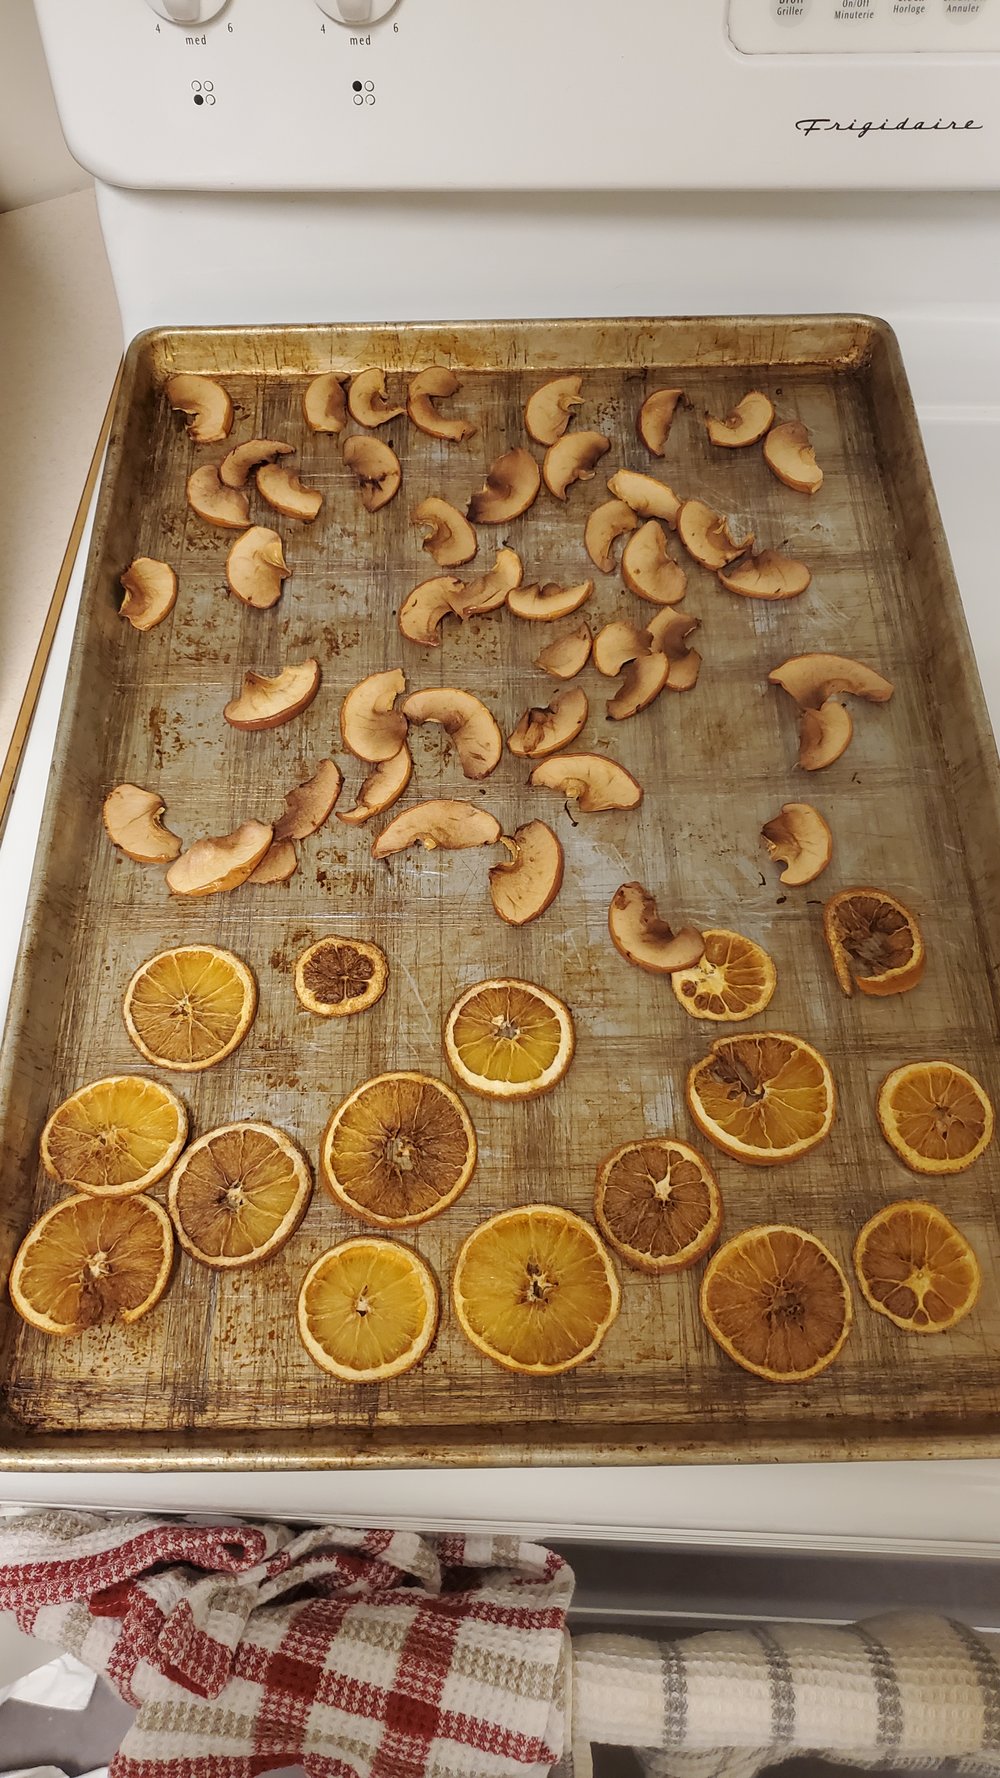  Once they’ve dried out, remove the cookie sheet from the oven and let the fruit cool.&nbsp; 